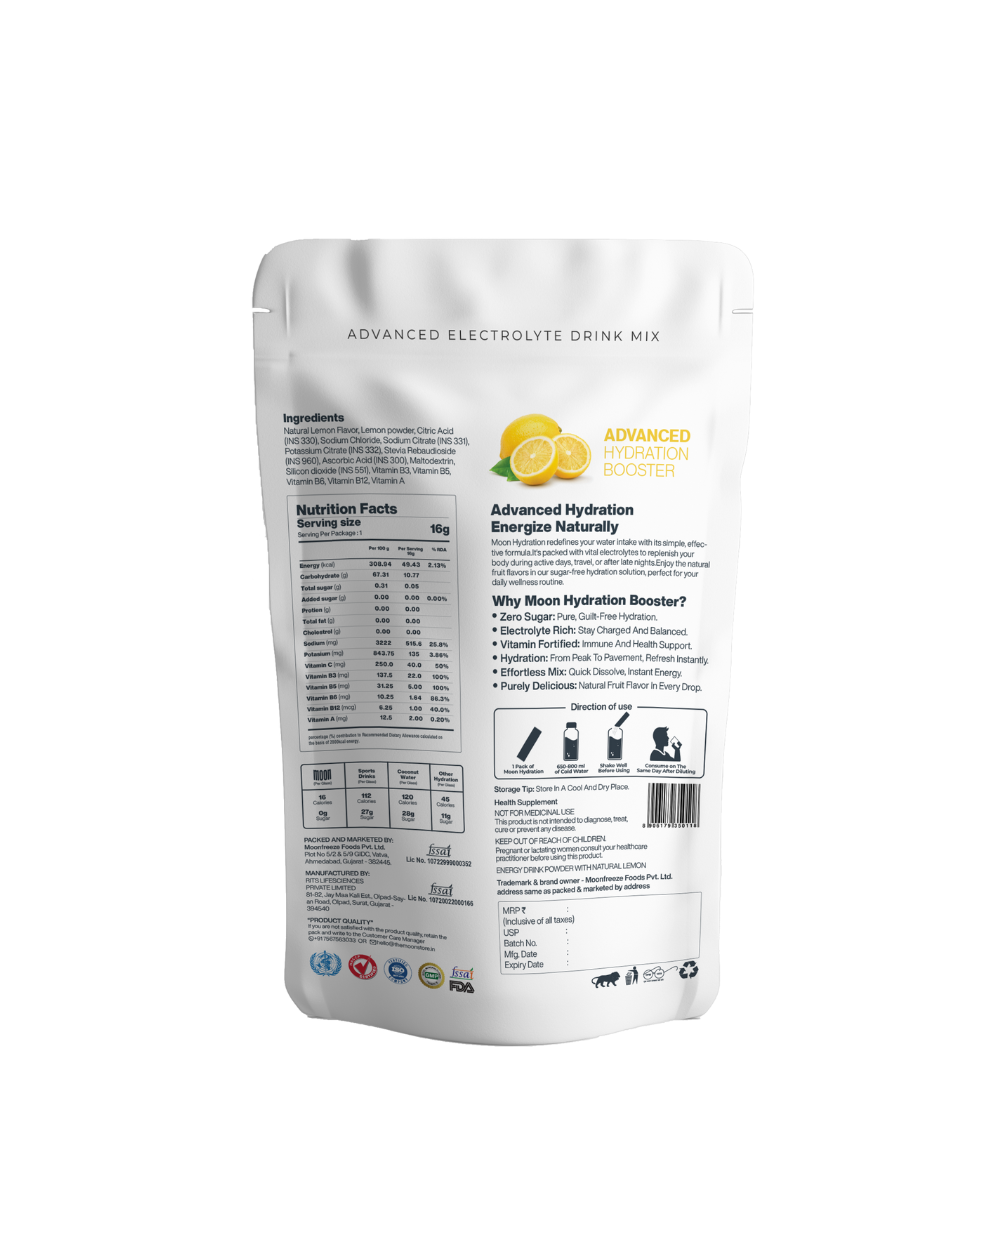 Pack of Moon Lemon Lunar Hydration Booster from MOONFREEZE FOODS PRIVATE LIMITED showcasing its nutritional facts label and hydration booster benefits, with a refreshing lemon flavor.